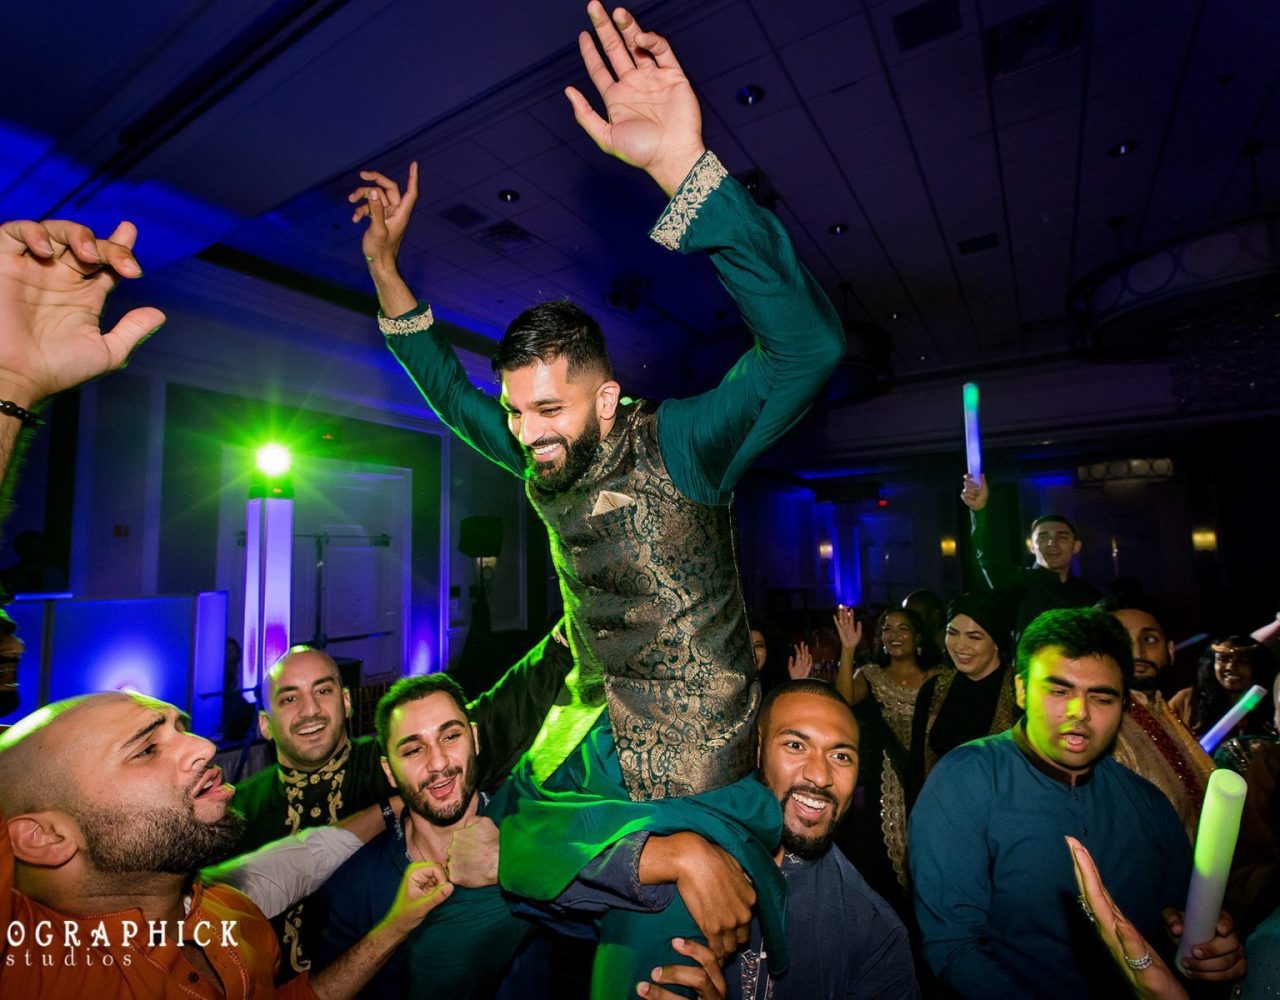 , DC Muslim Wedding of Eiman and Usman at the Fairview Park Marriott and The Westfields Marriott